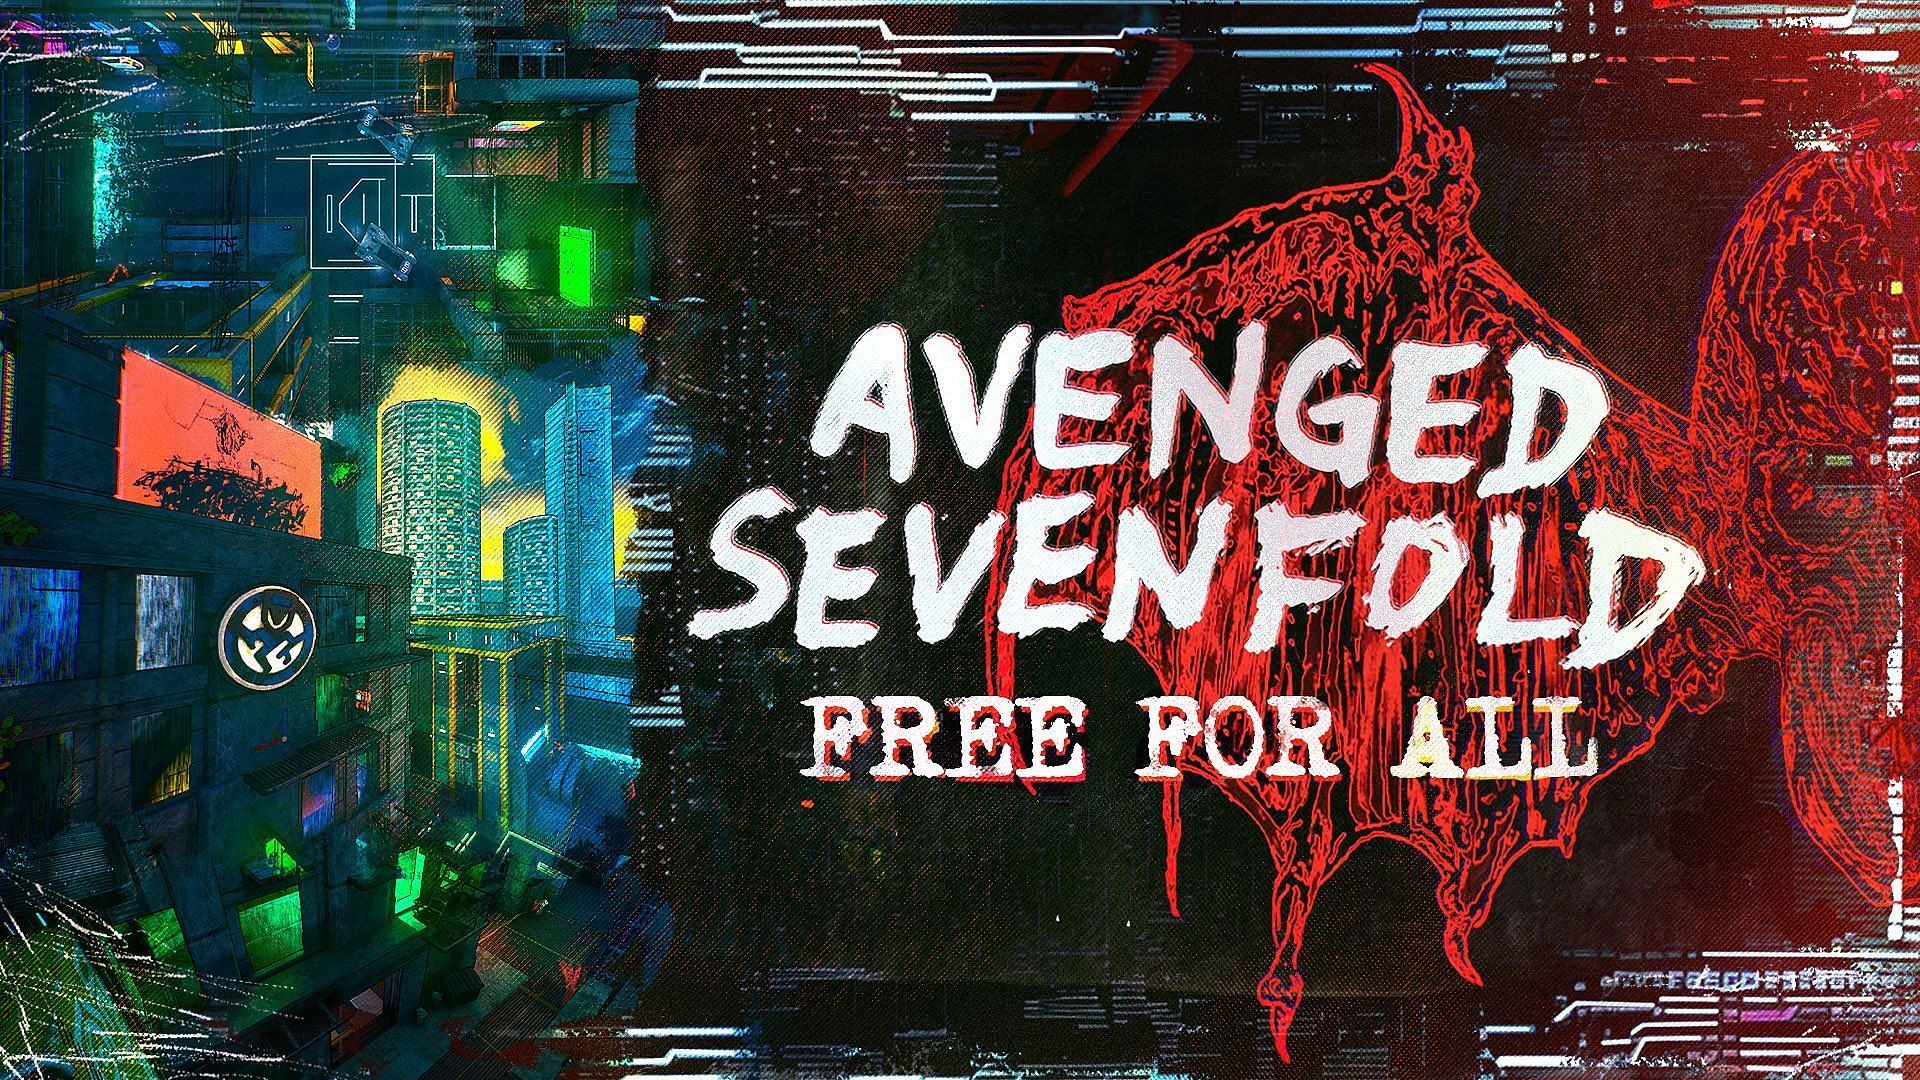 Avenged Sevenfold is collaborating with Fortnite, but there